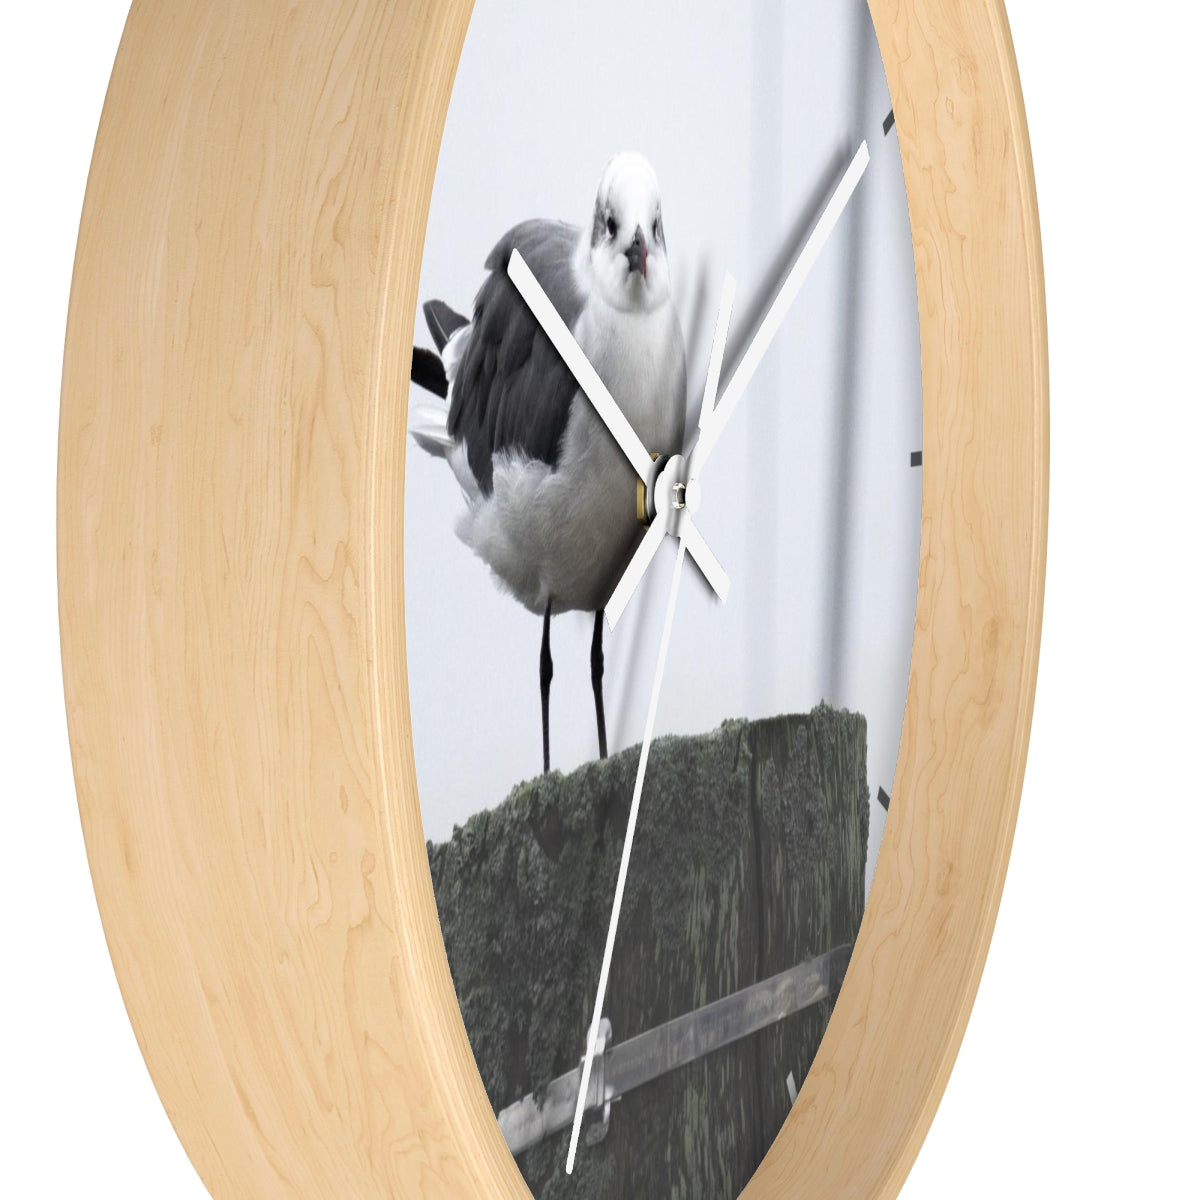 Gull on a Piling Wall clock